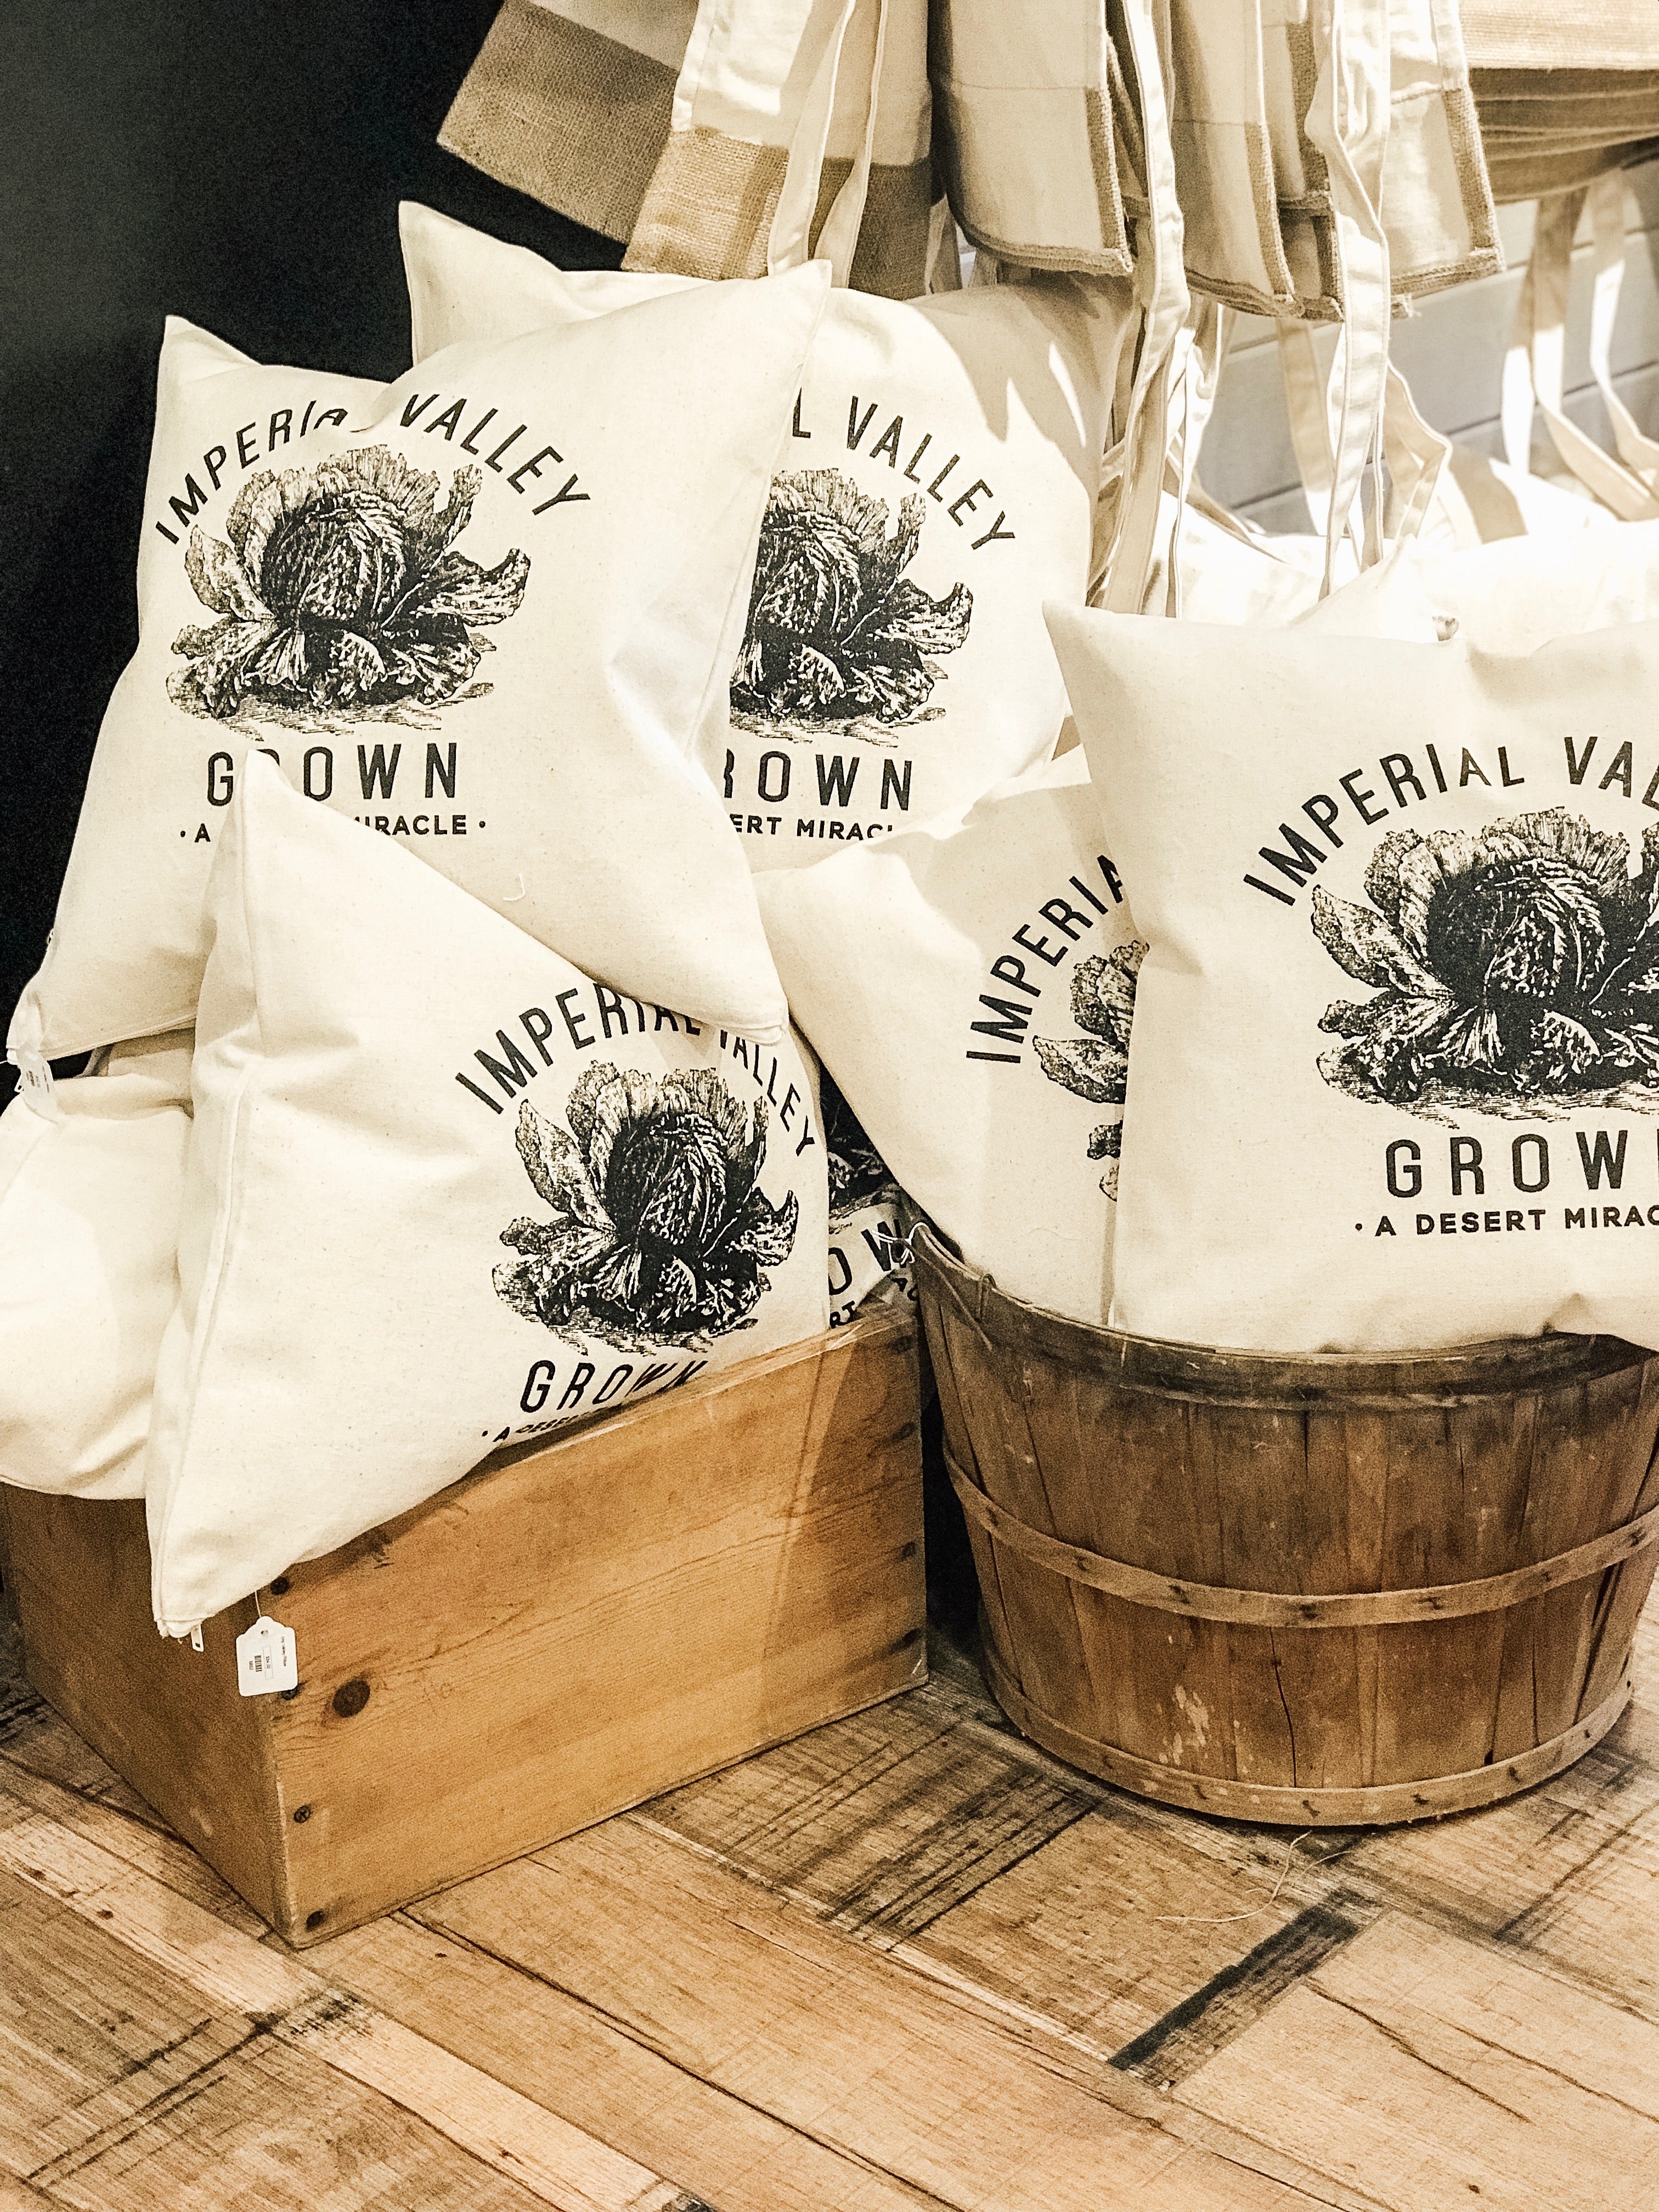 Imperial Valley Grown Pillow